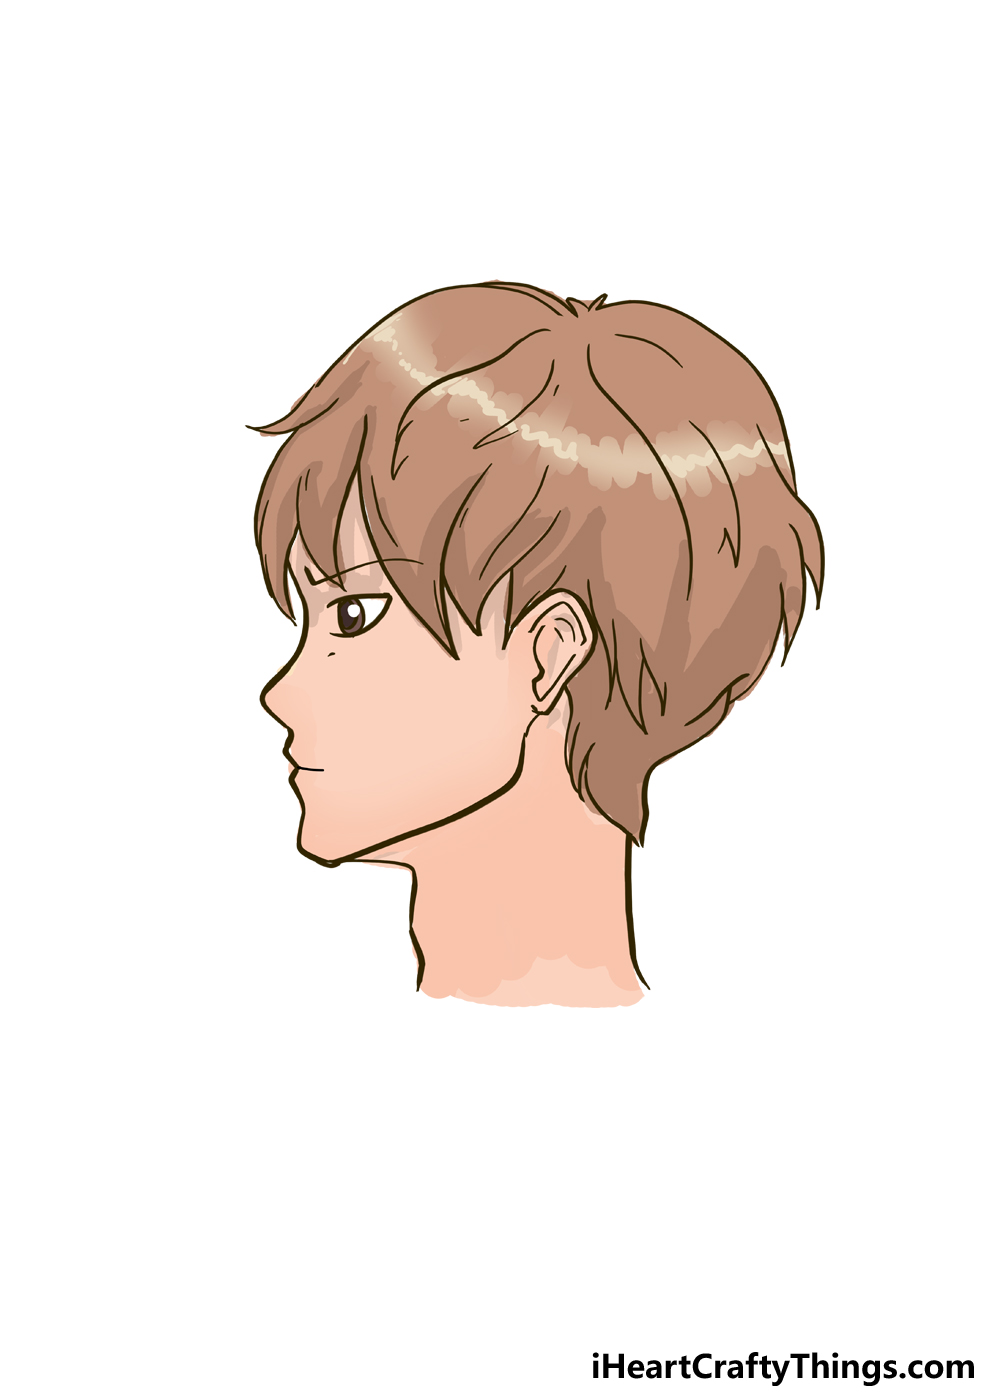 How to Draw An Anime Side Profile step 6